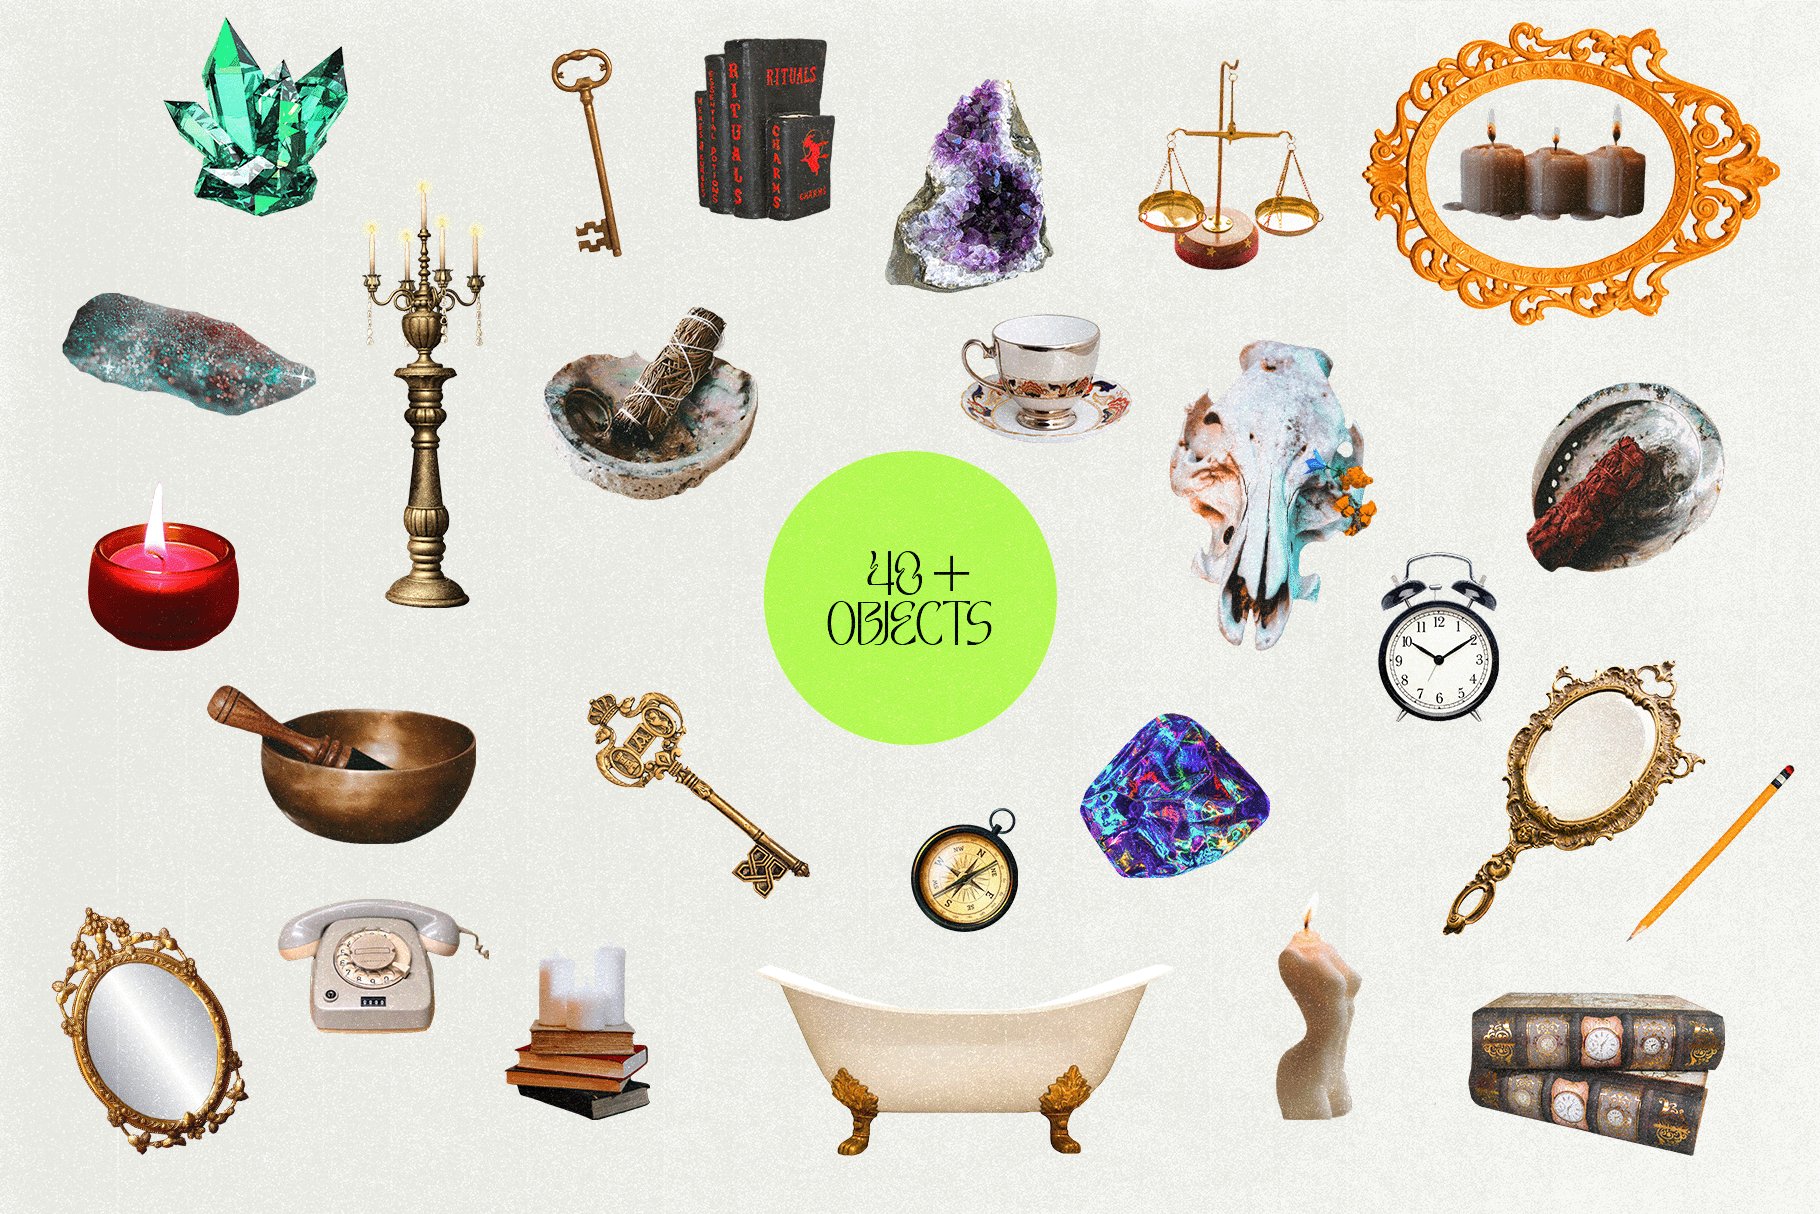 Some objects for the creative astrology illustration.